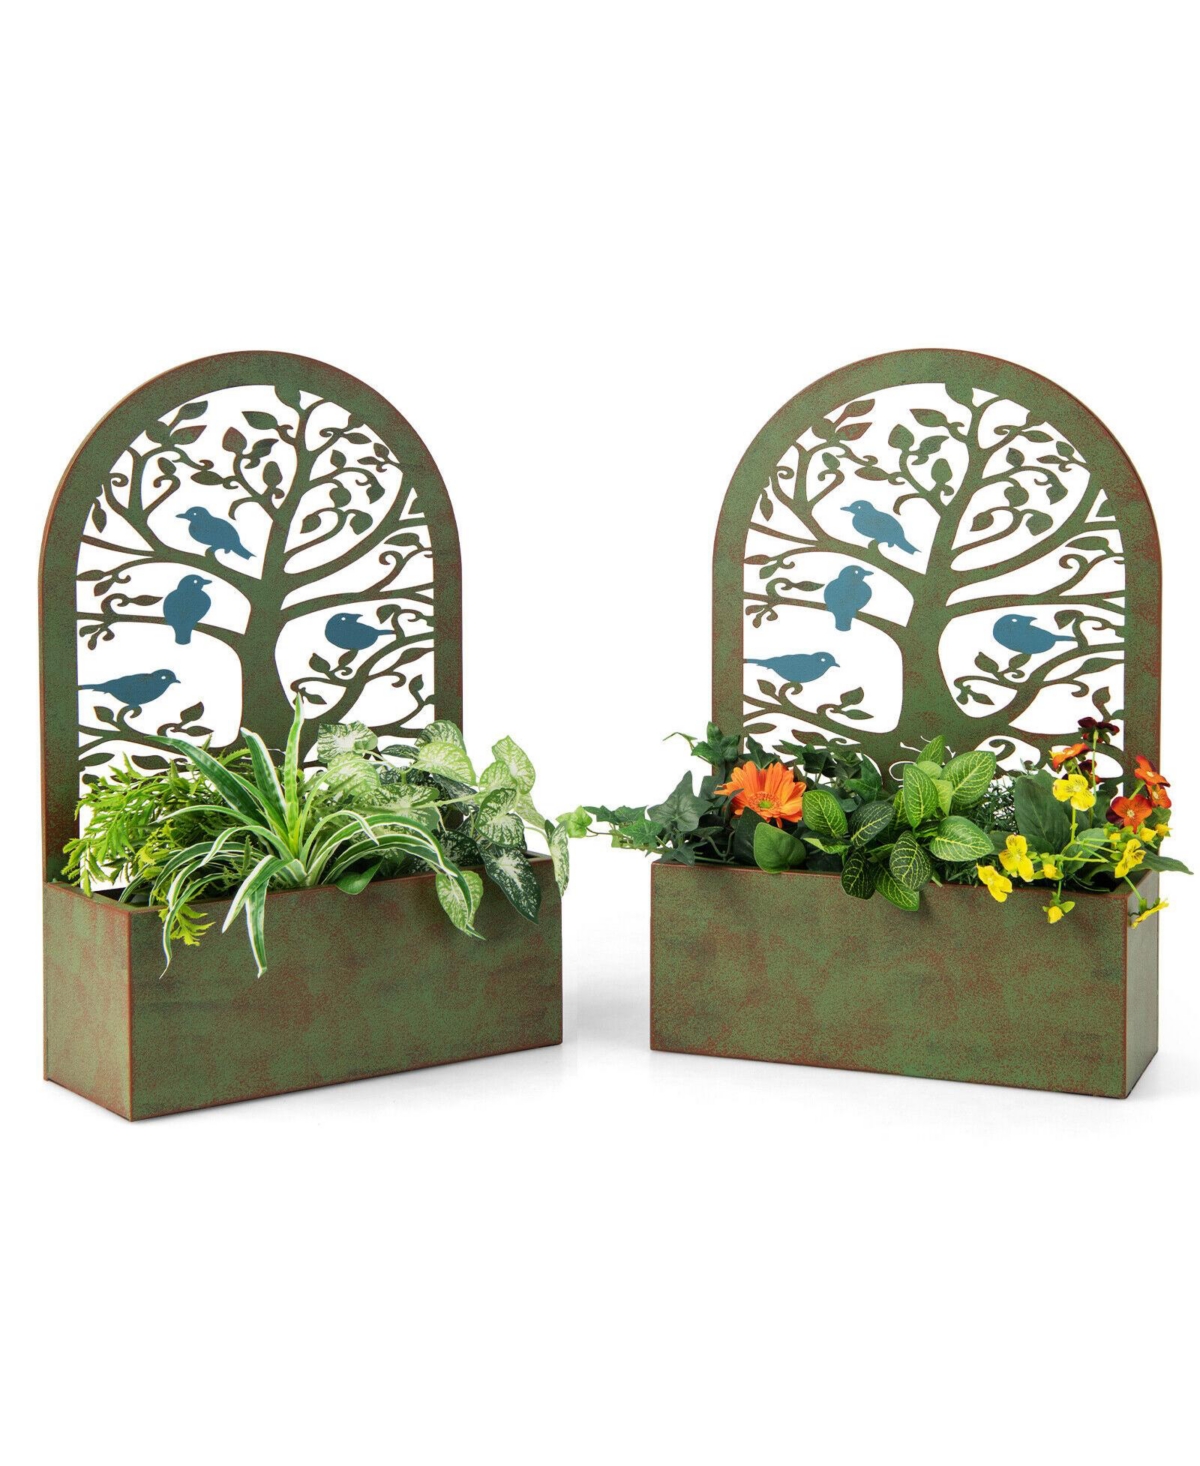 Set of 2 Decorative Raised Garden Bed for Climbing Plants-Rust - Green